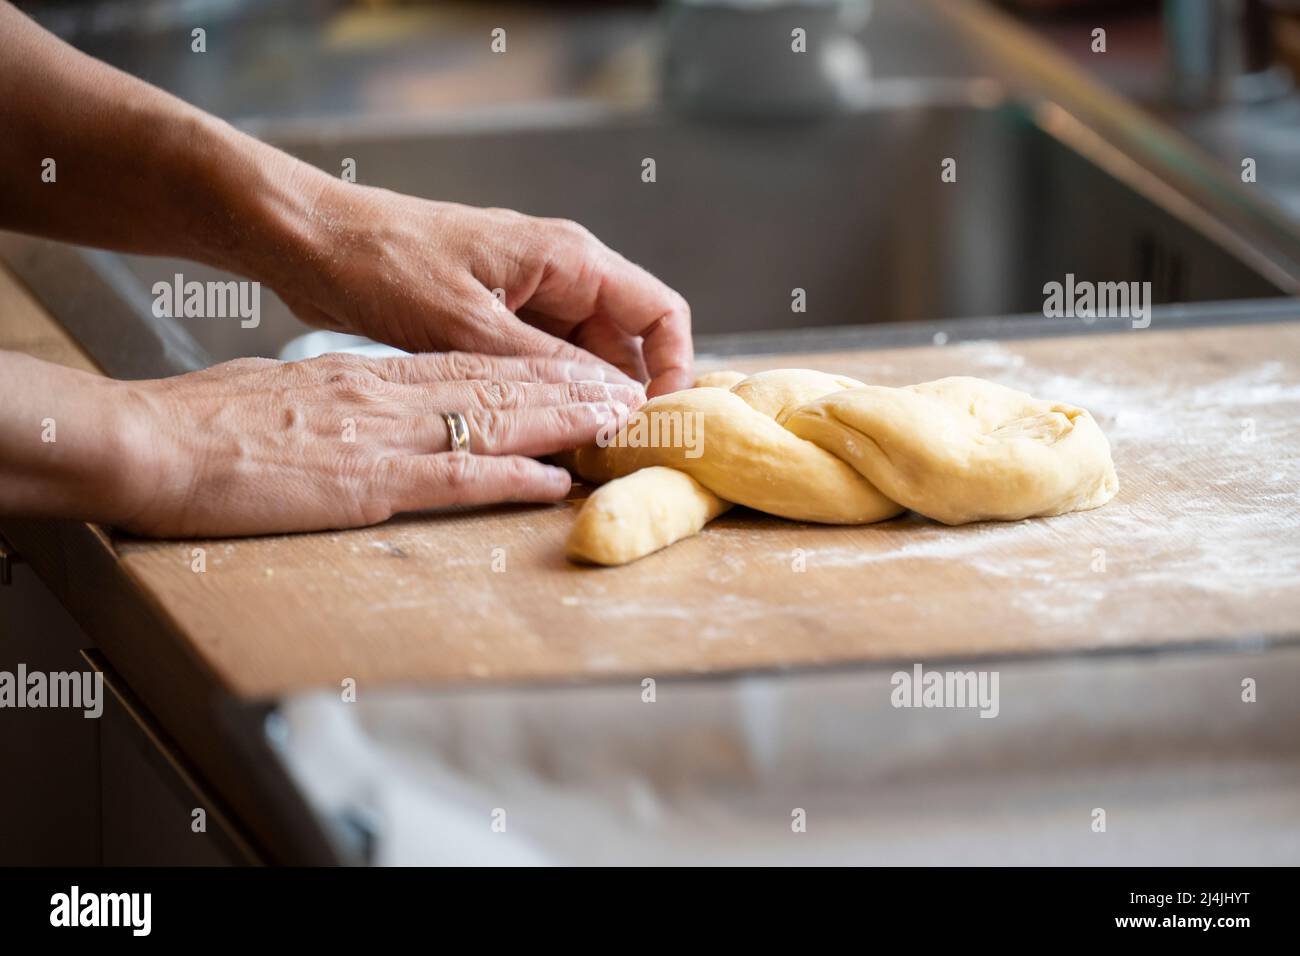 baking handmade easter braid with sweet yeast dough on countertop in kitchen Stock Photo